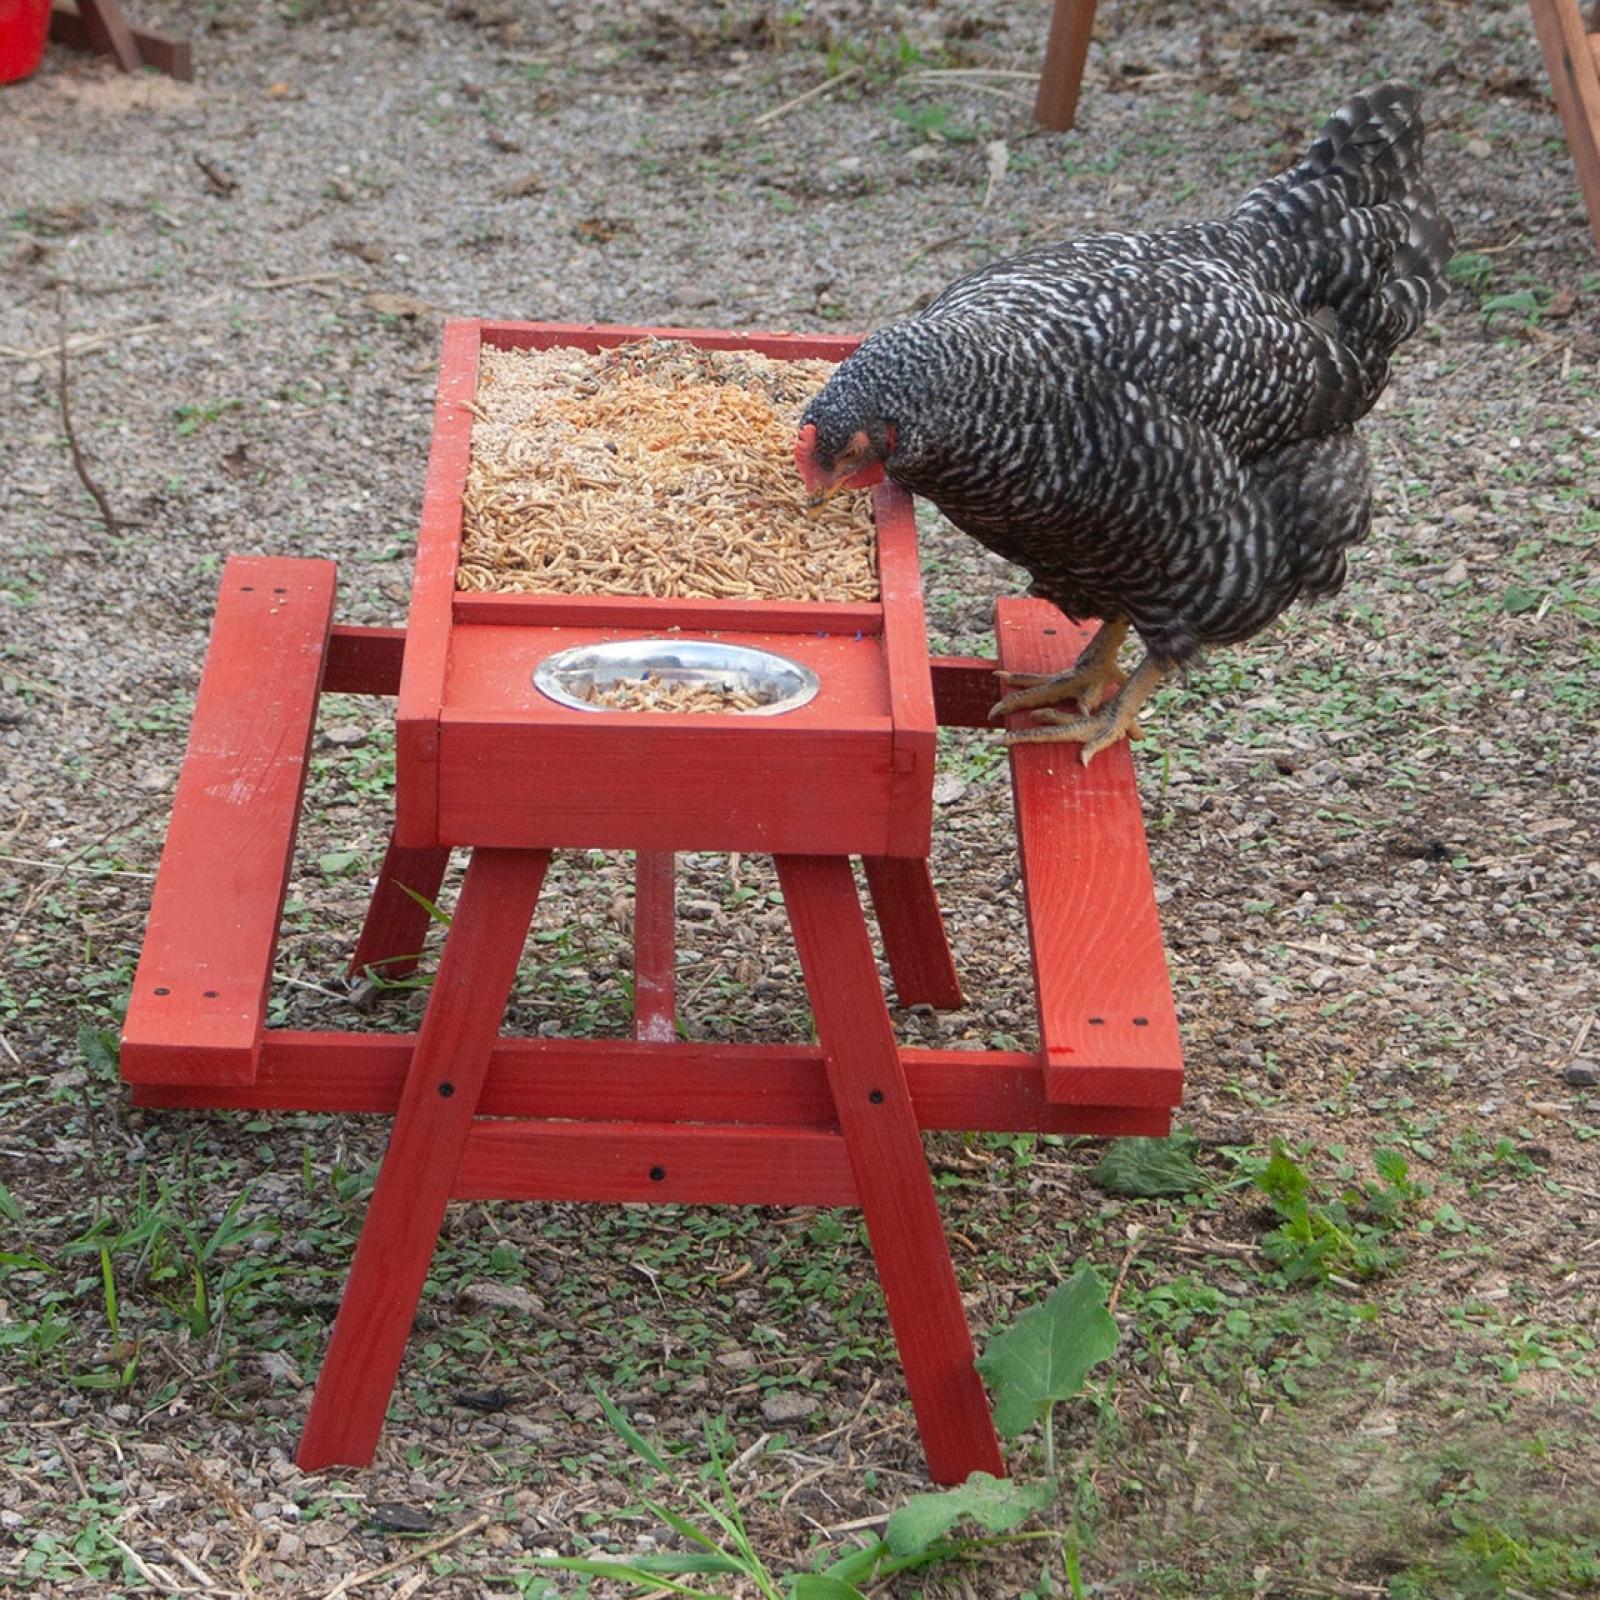 Coops & Feathers Chick-Nic Table Poultry Feeder